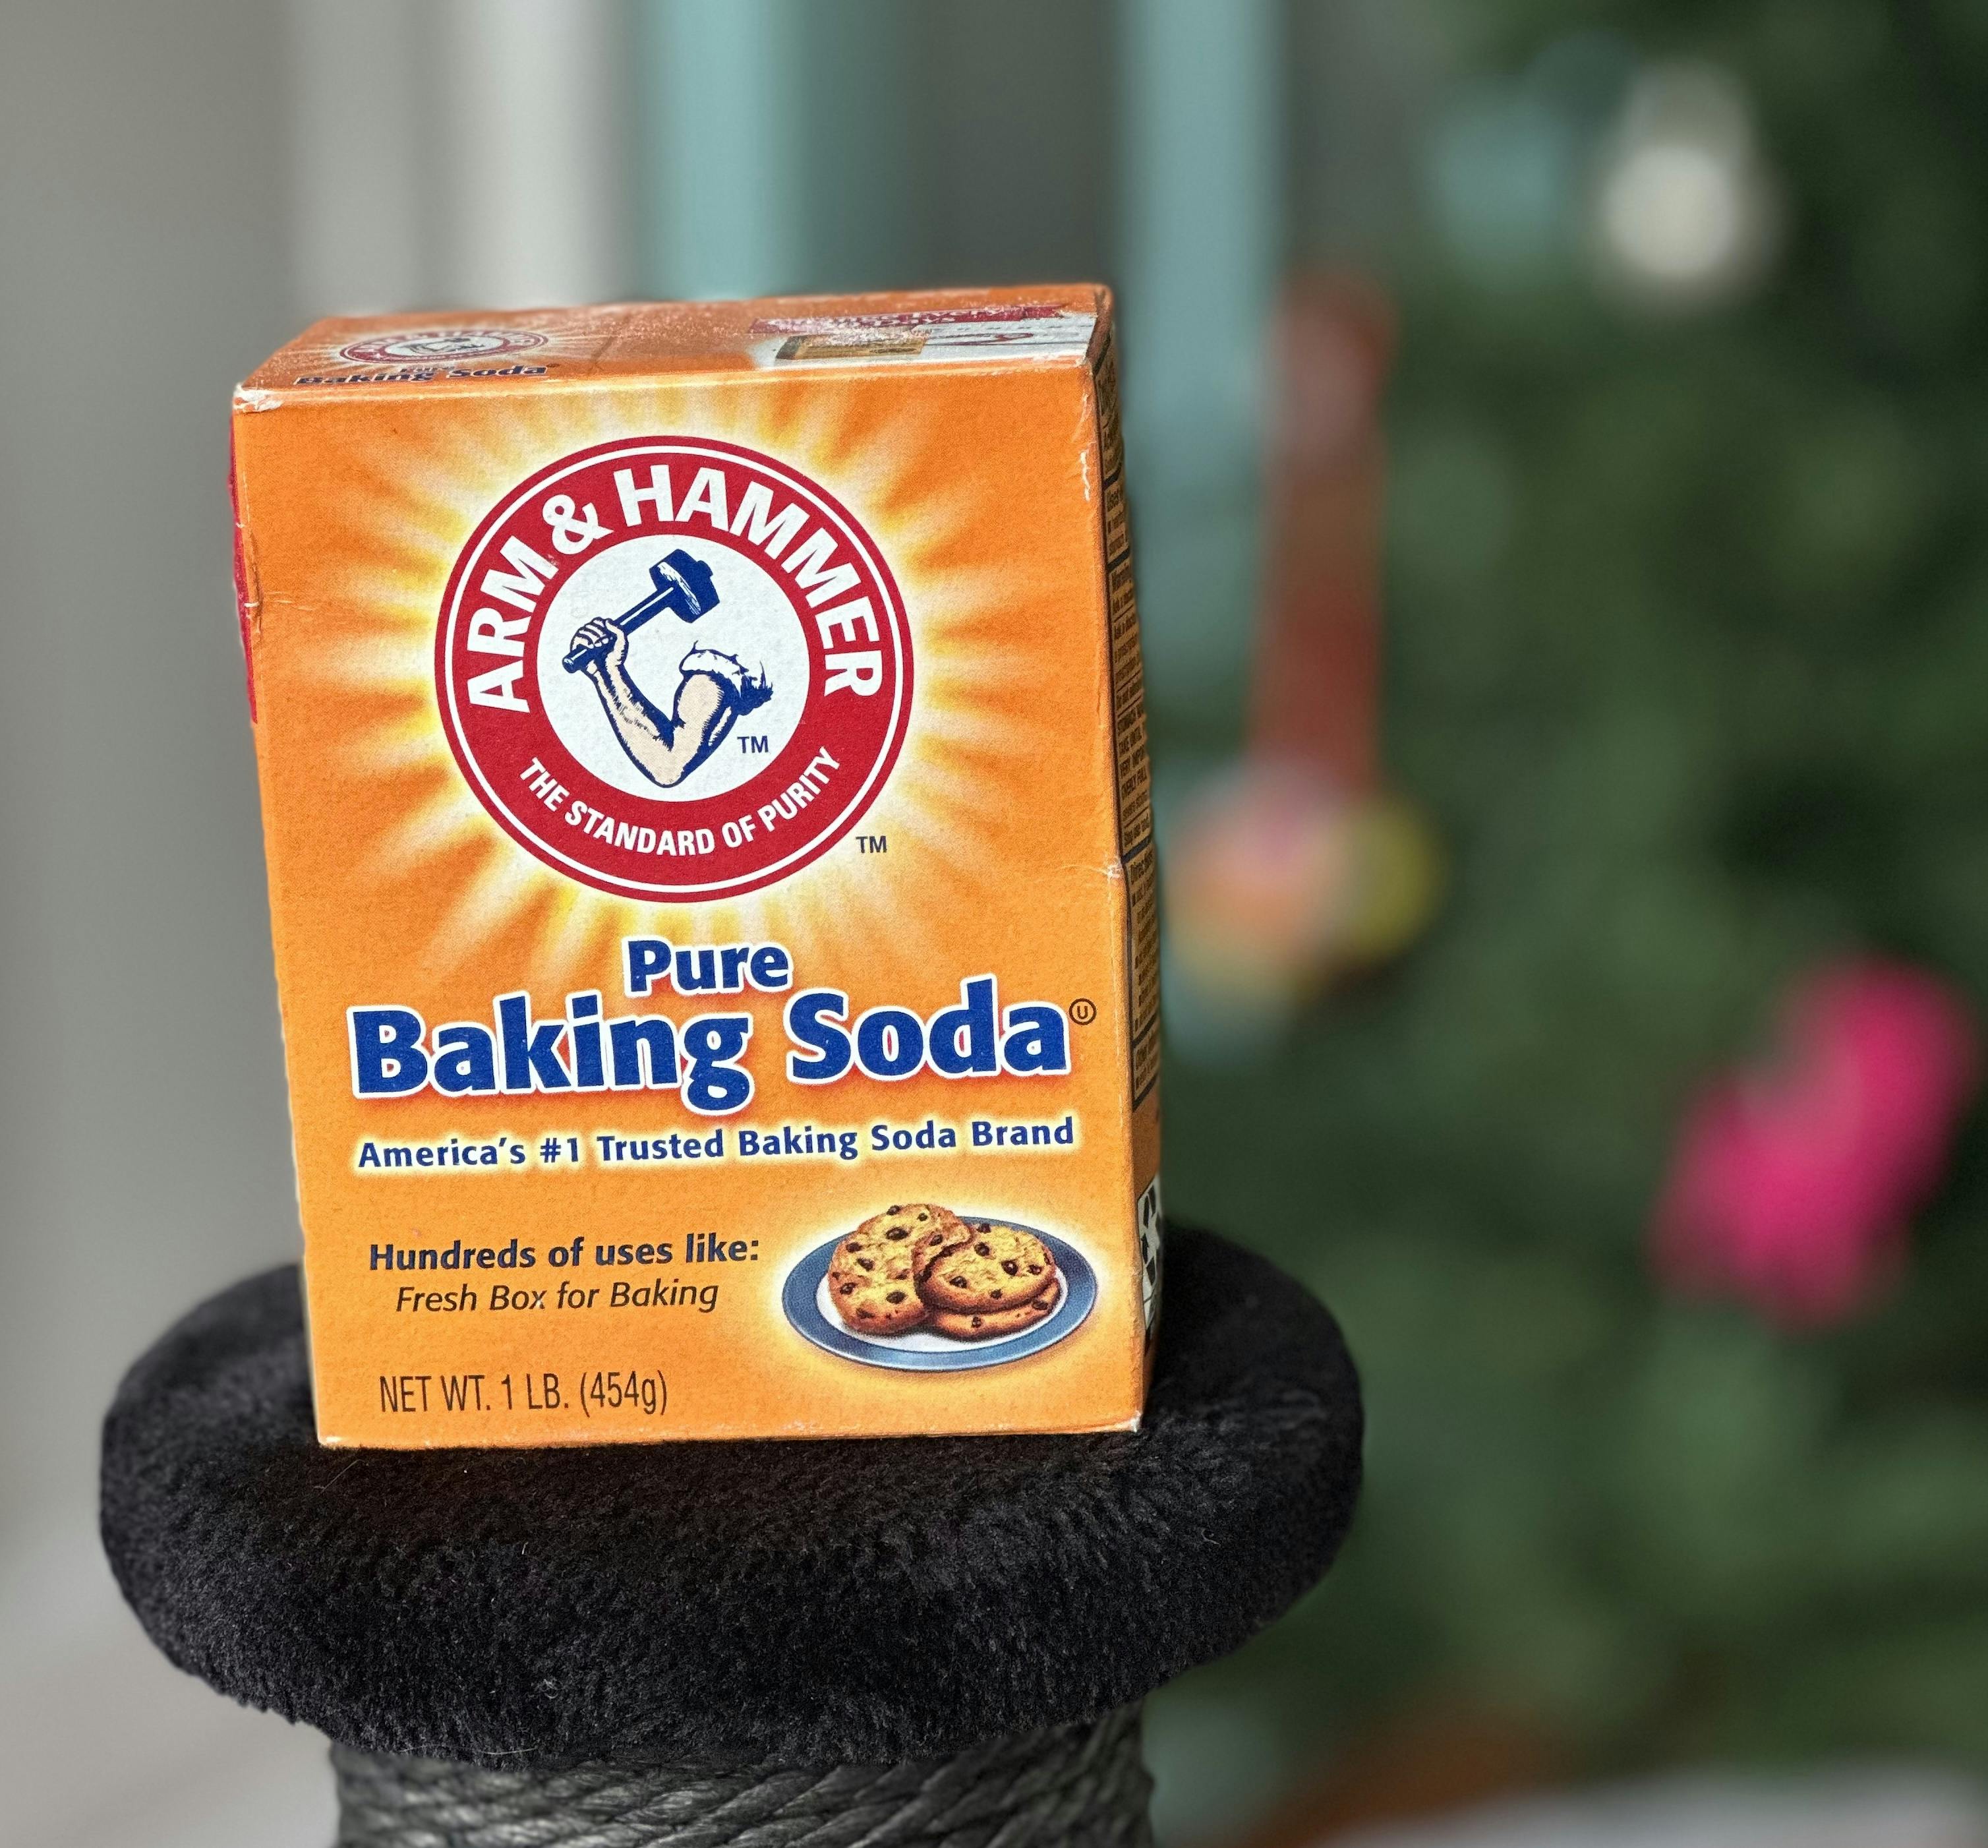 An image of a box of Arm & Hammer Baking Soda